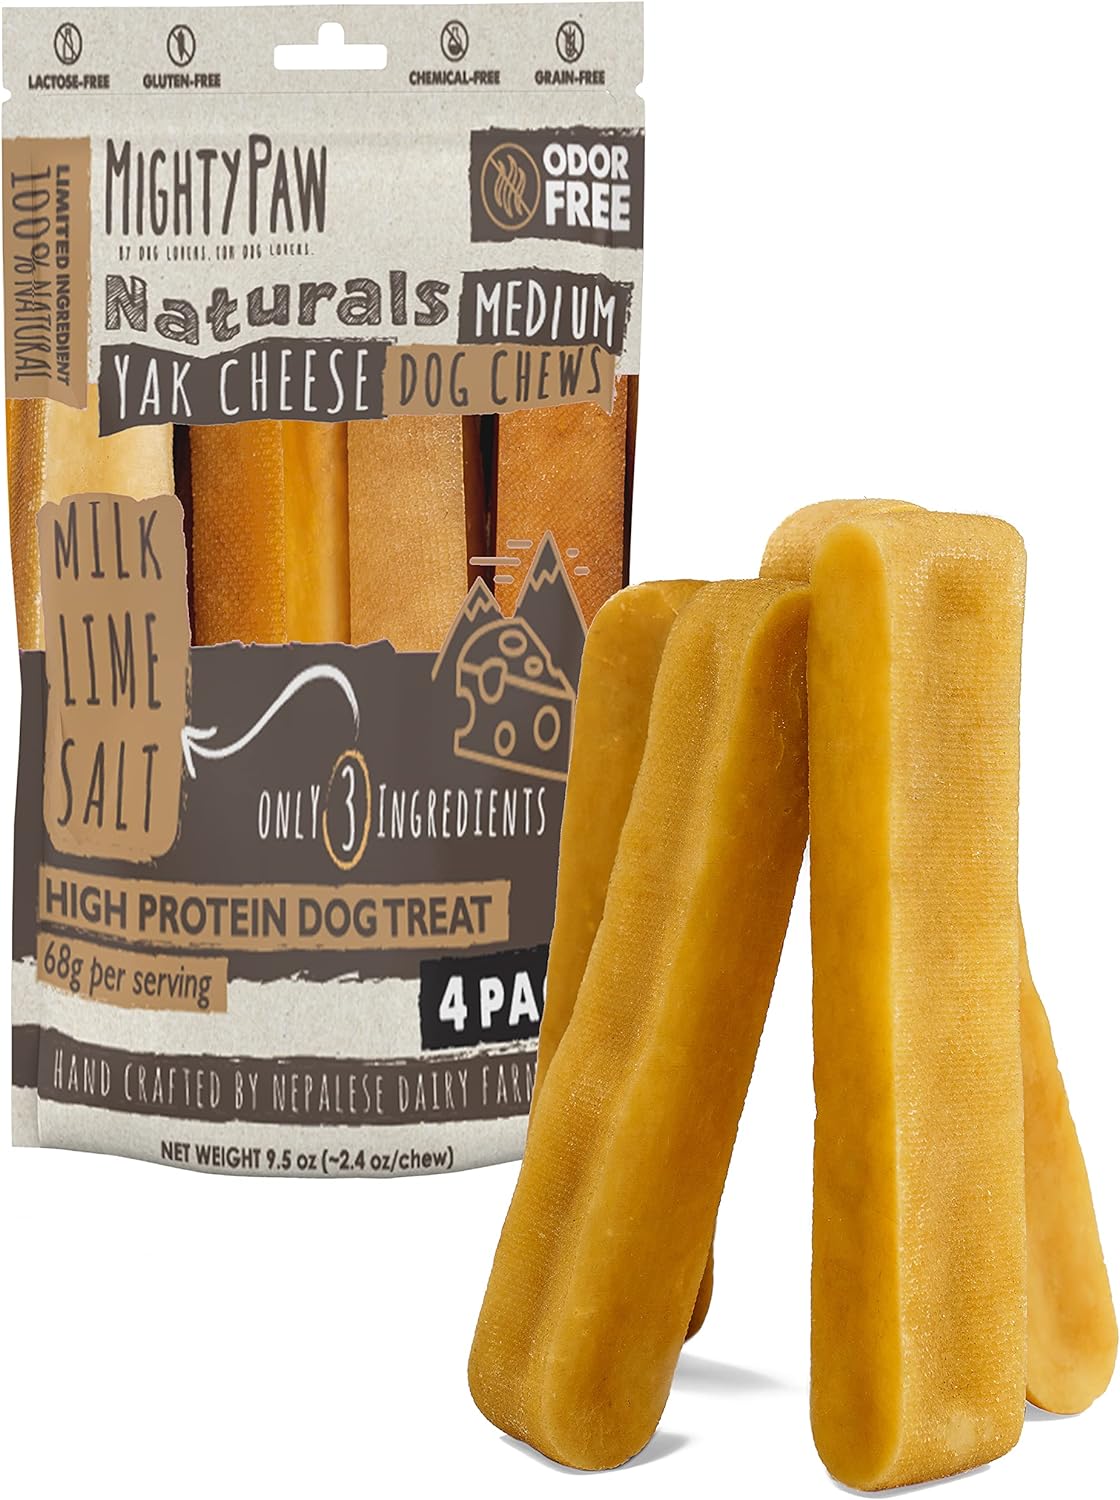 Mighty Paw Yak Cheese Chews for Dogs | All-Natural Long Lasting Pet Treats. Odorless Limited-Ingredient Chews for Puppies & Power-Chewers (Medium, 4 Pack)